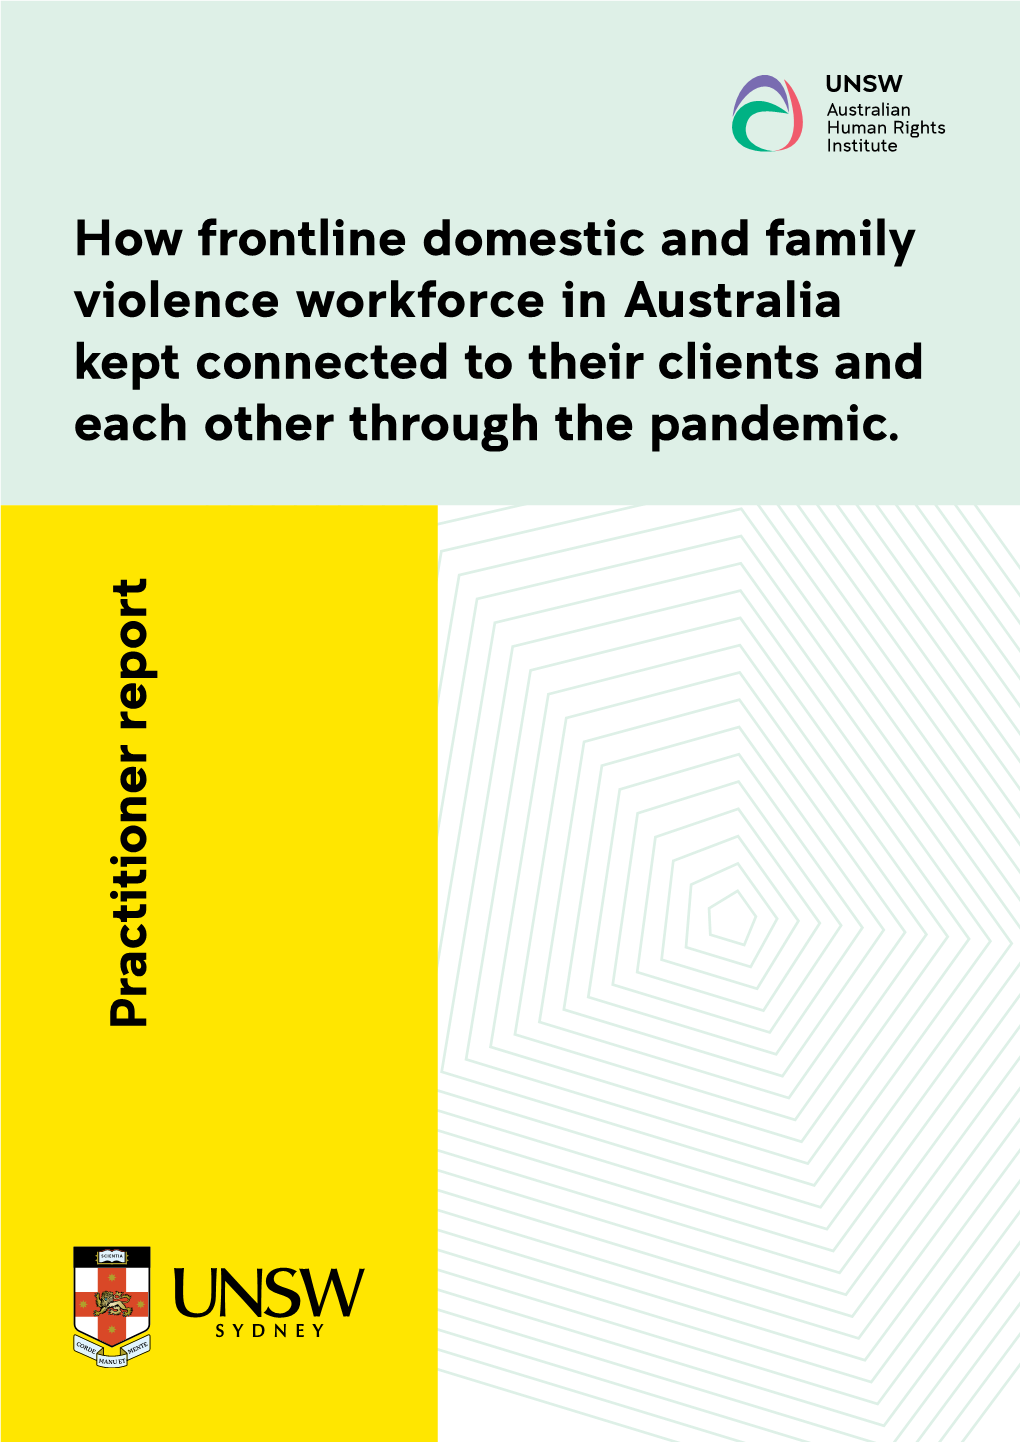 How Frontline Domestic and Family Violence Workforce in Australia Kept Connected to Their Clients and Each Other Through the Pandemic